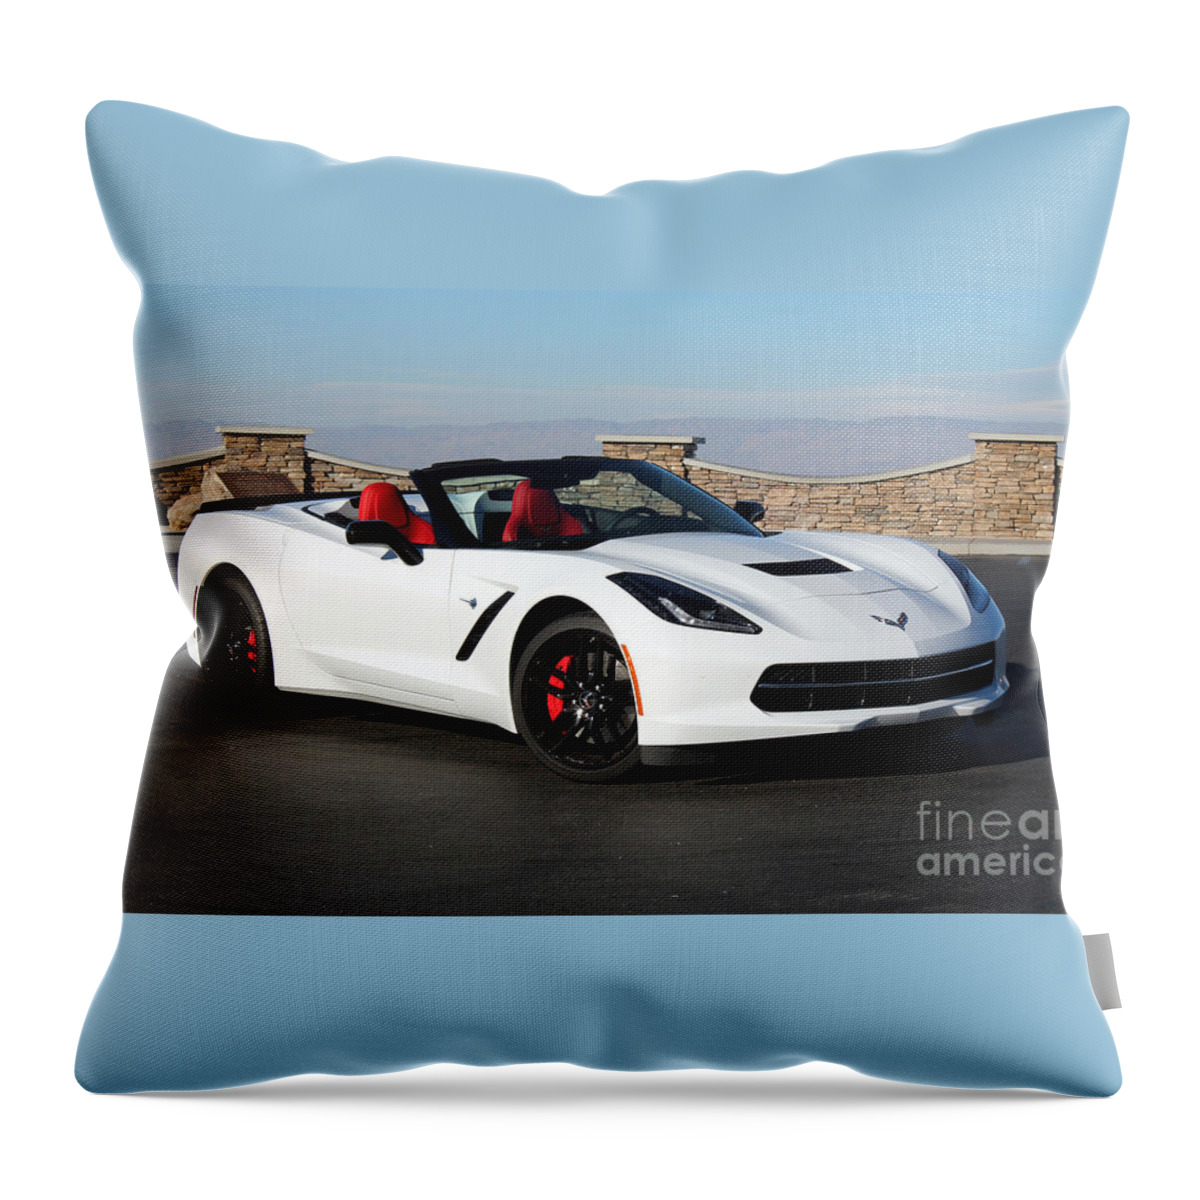 Corvette Throw Pillow featuring the photograph Chevy Corvette by Action